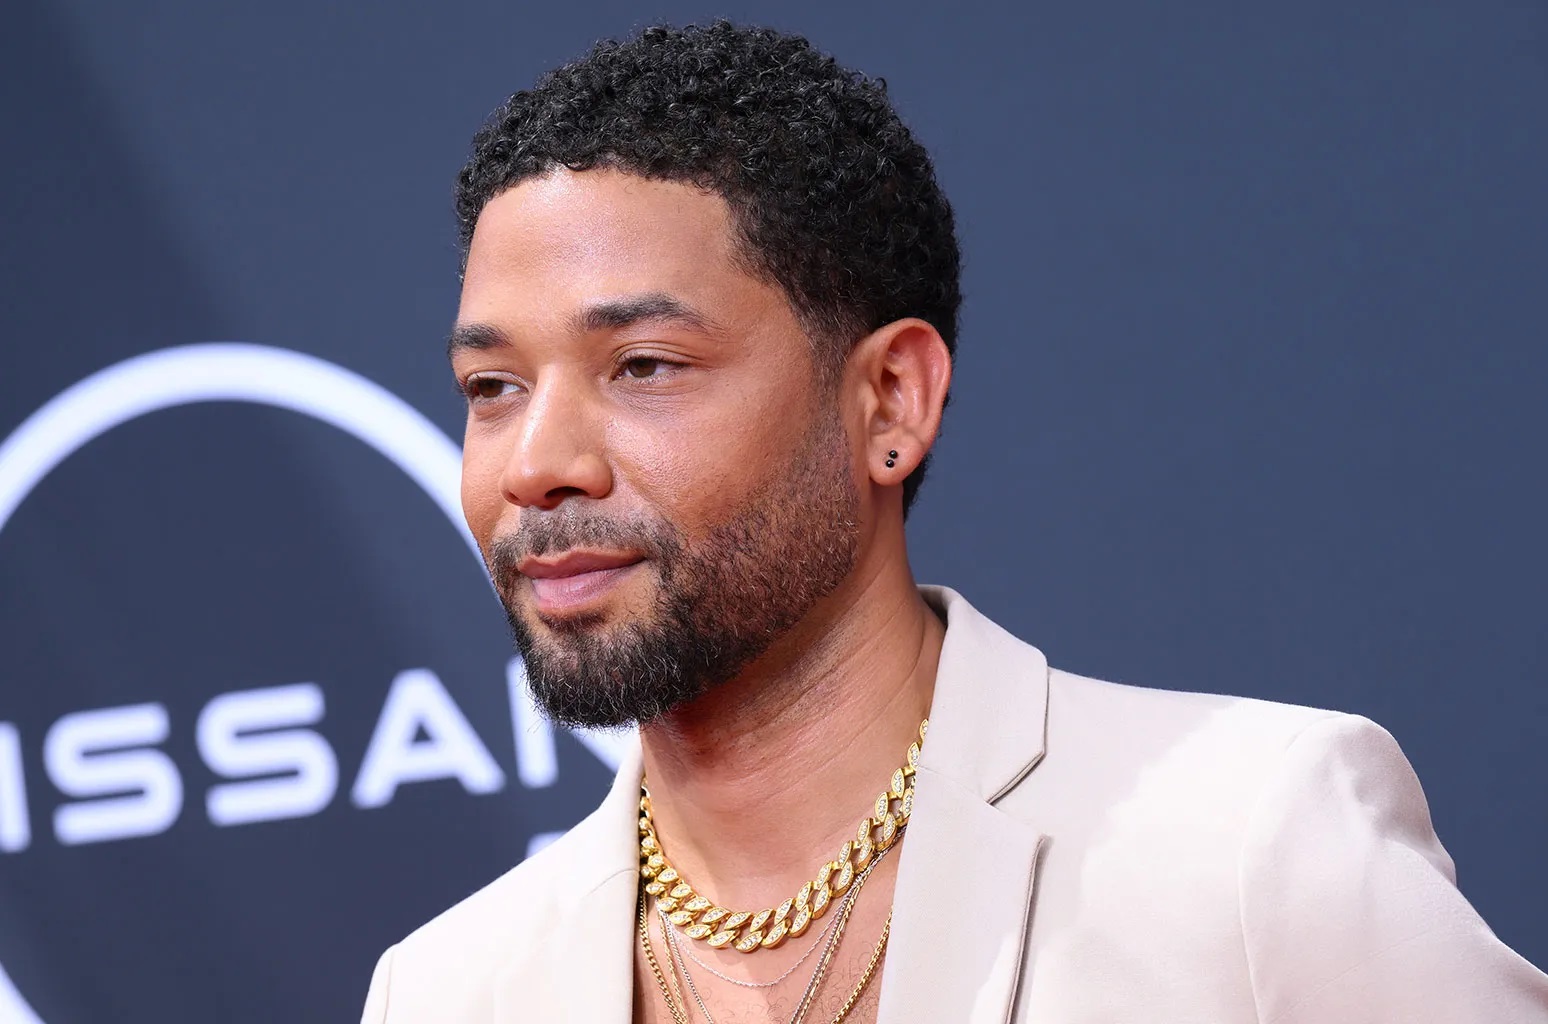 Jussie Smollett Successfully Completes 5-Month Outpatient Treatment Program